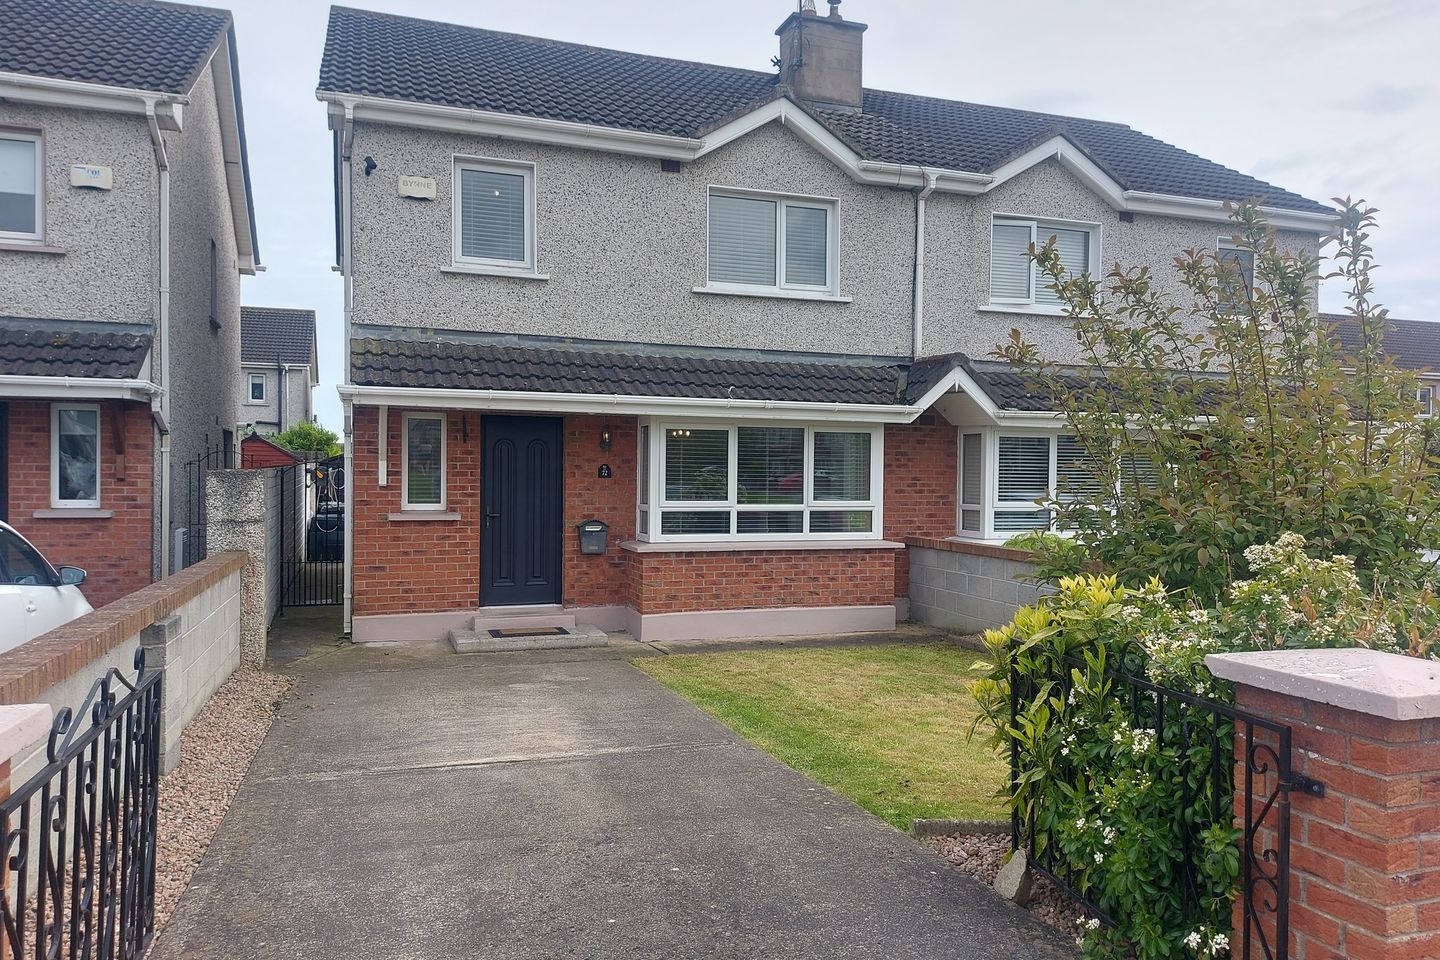 72 Castle Manor, Ballymakenny Road, Drogheda, Co. Louth